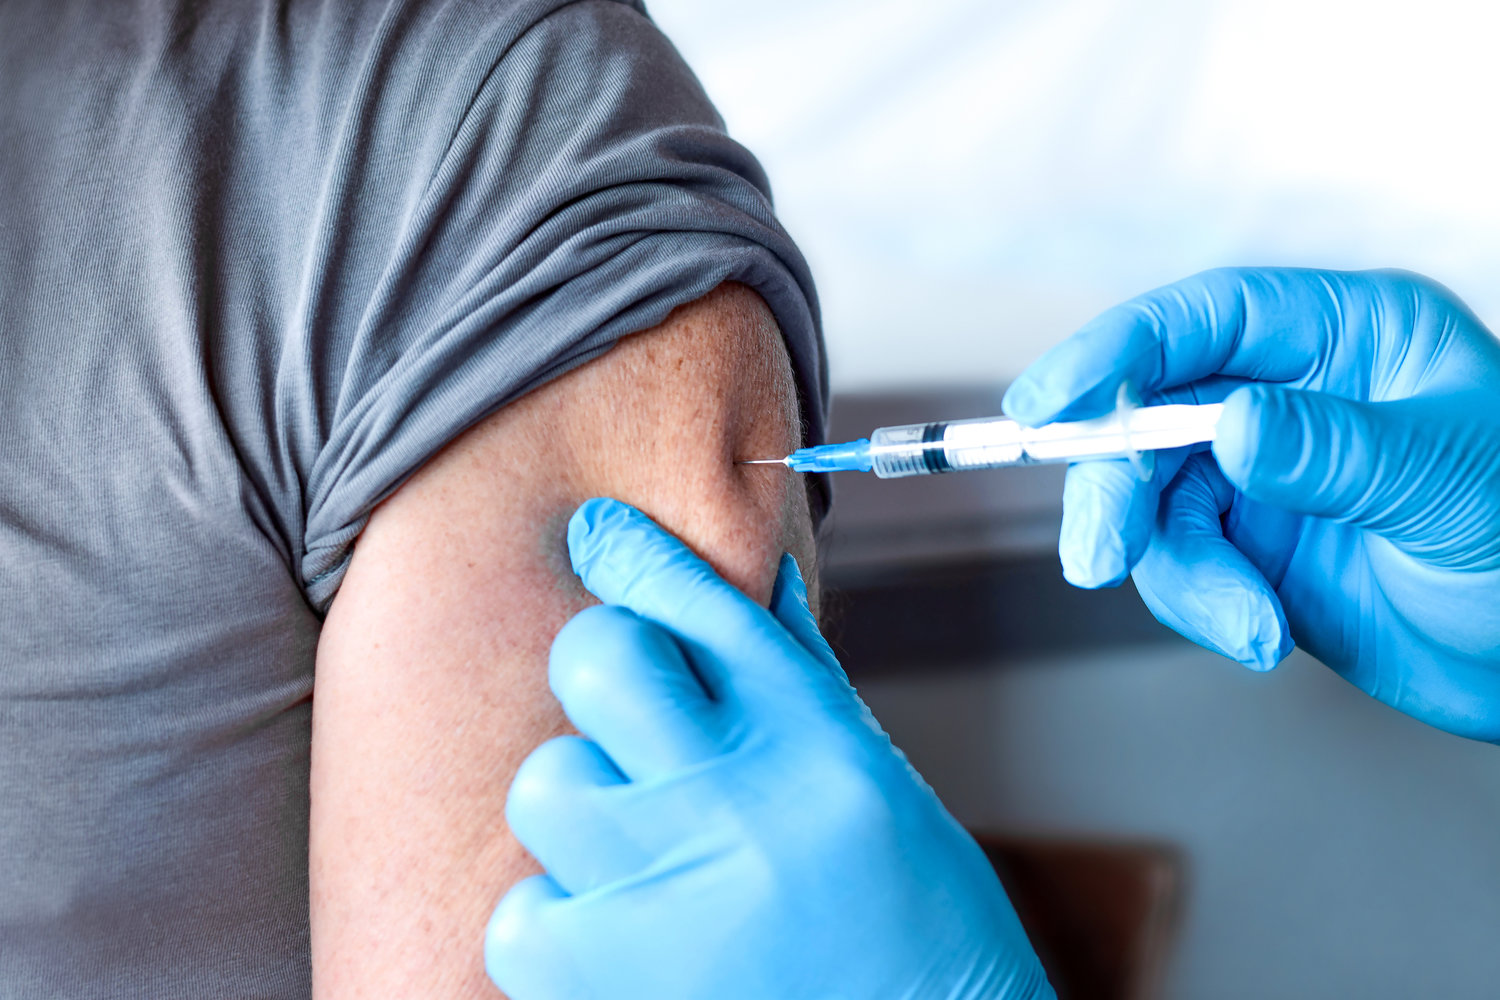 A New Orleans court temporarily halted the vaccine mandate for all employees at companies with more than 100 workers must get COVID-19 vaccinations by Jan. 4. (Dreamstime/TNS)